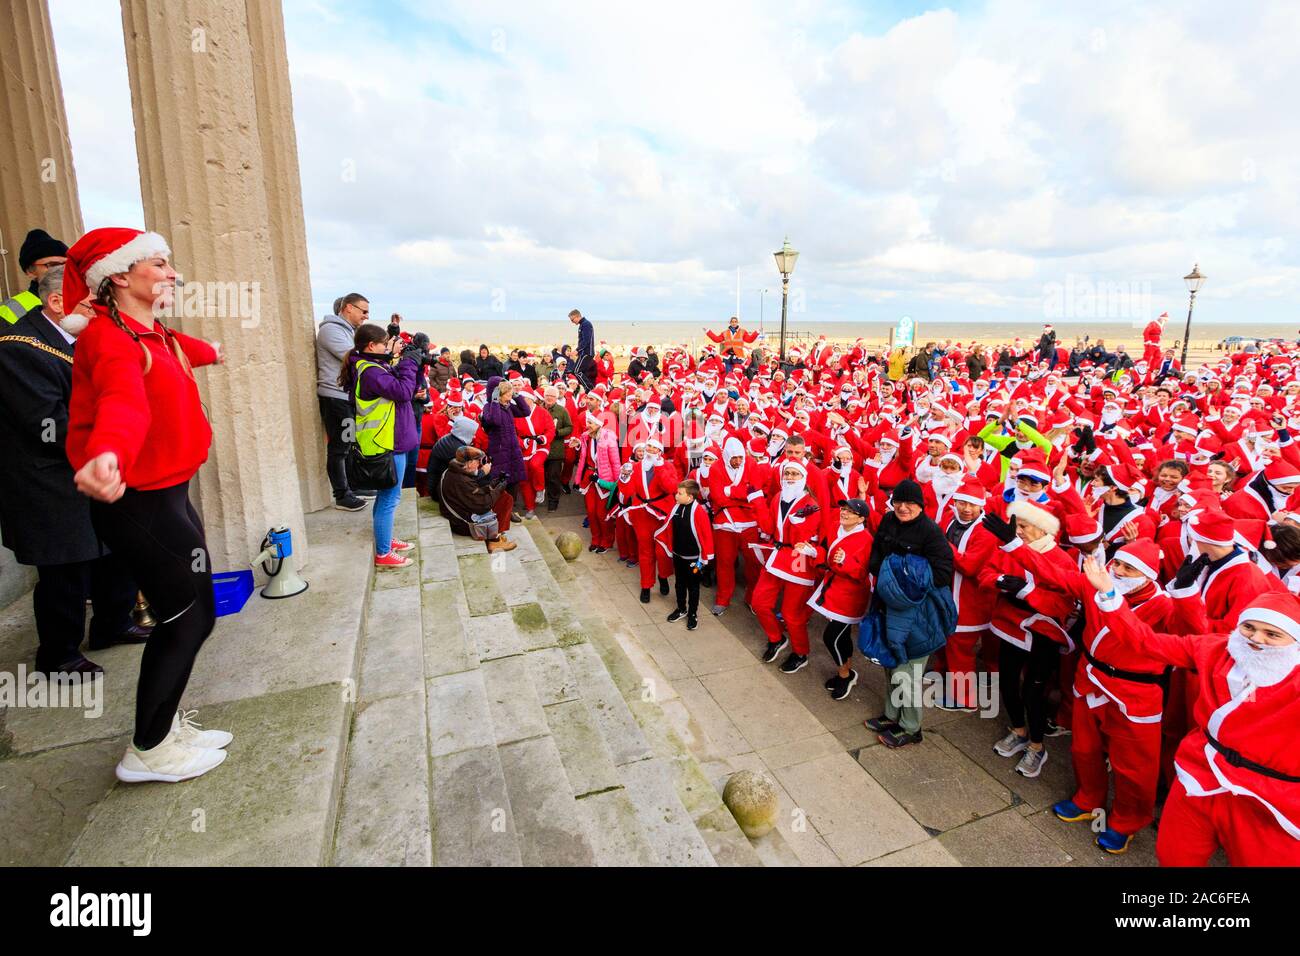 Young woman fitness trainer standing on top of steps directing group exercise with a crowd of people all dressed up as Father Christmas at the bottom of the steps on the seafront at Herne Bay in Kent, England. 'Santa's on the Run' Pilgrims hospices annual charity event. Stock Photo